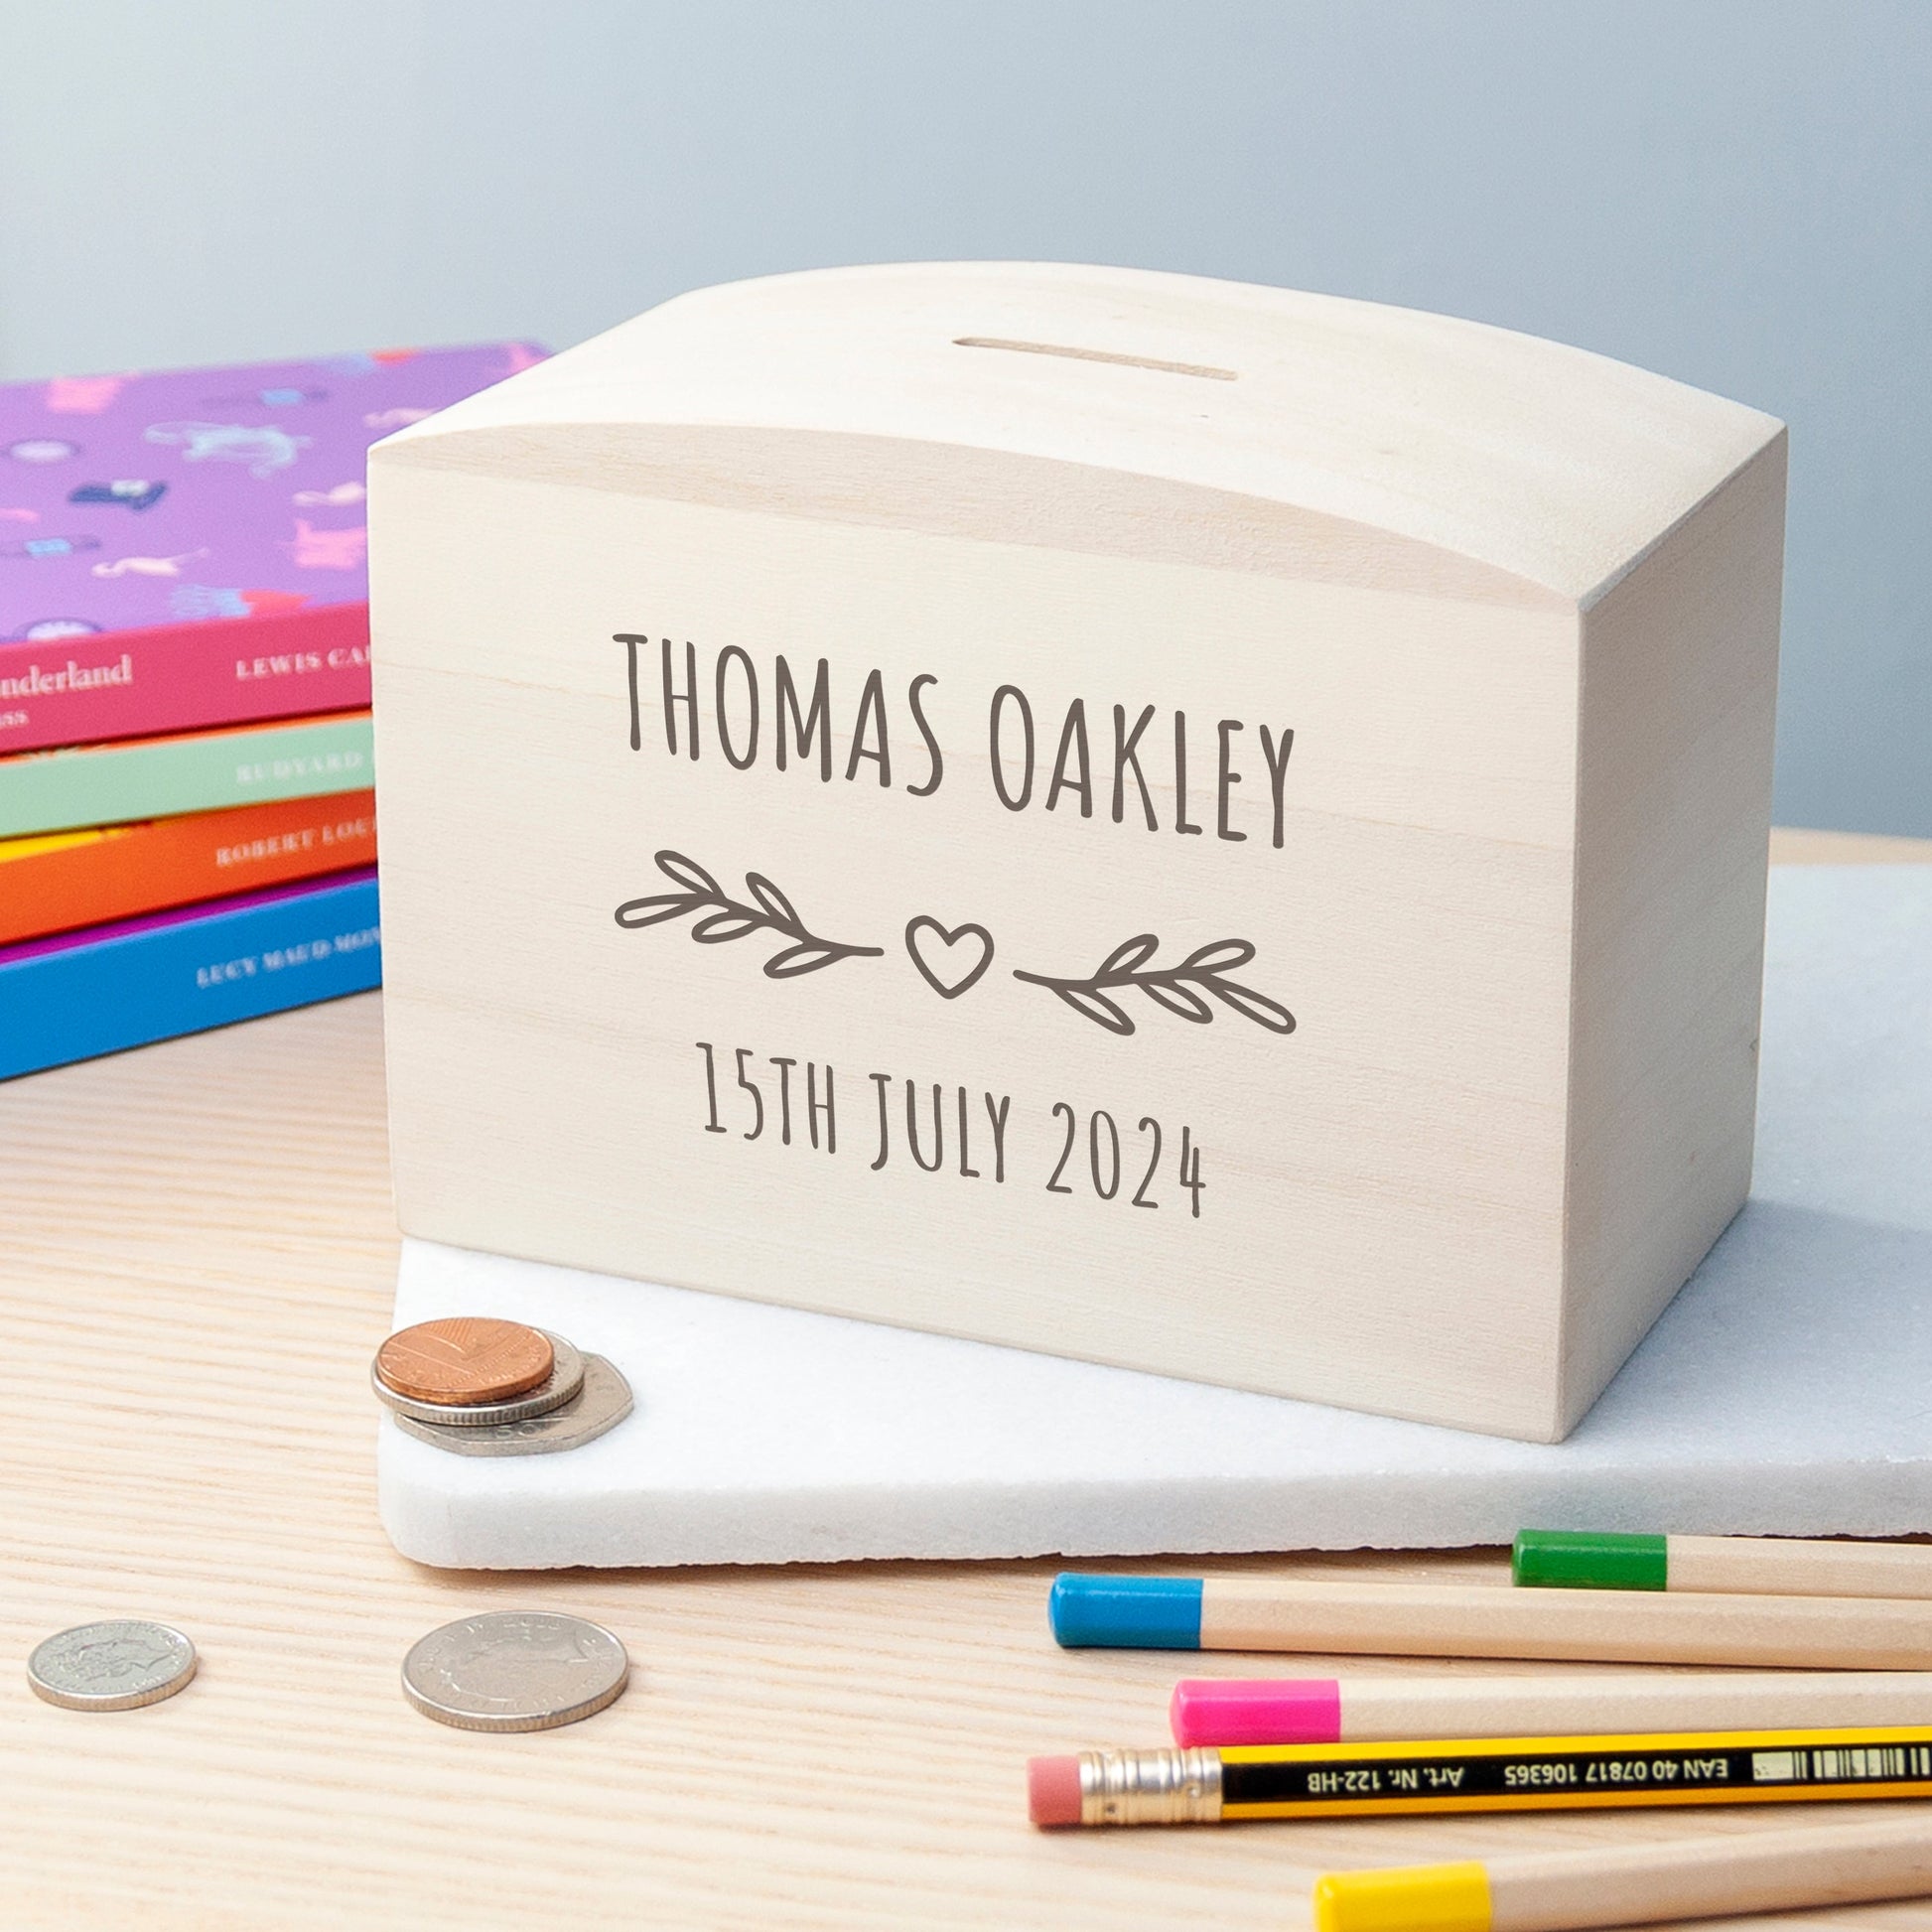 Personalized Money Boxes - Personalized New Baby Money Box 